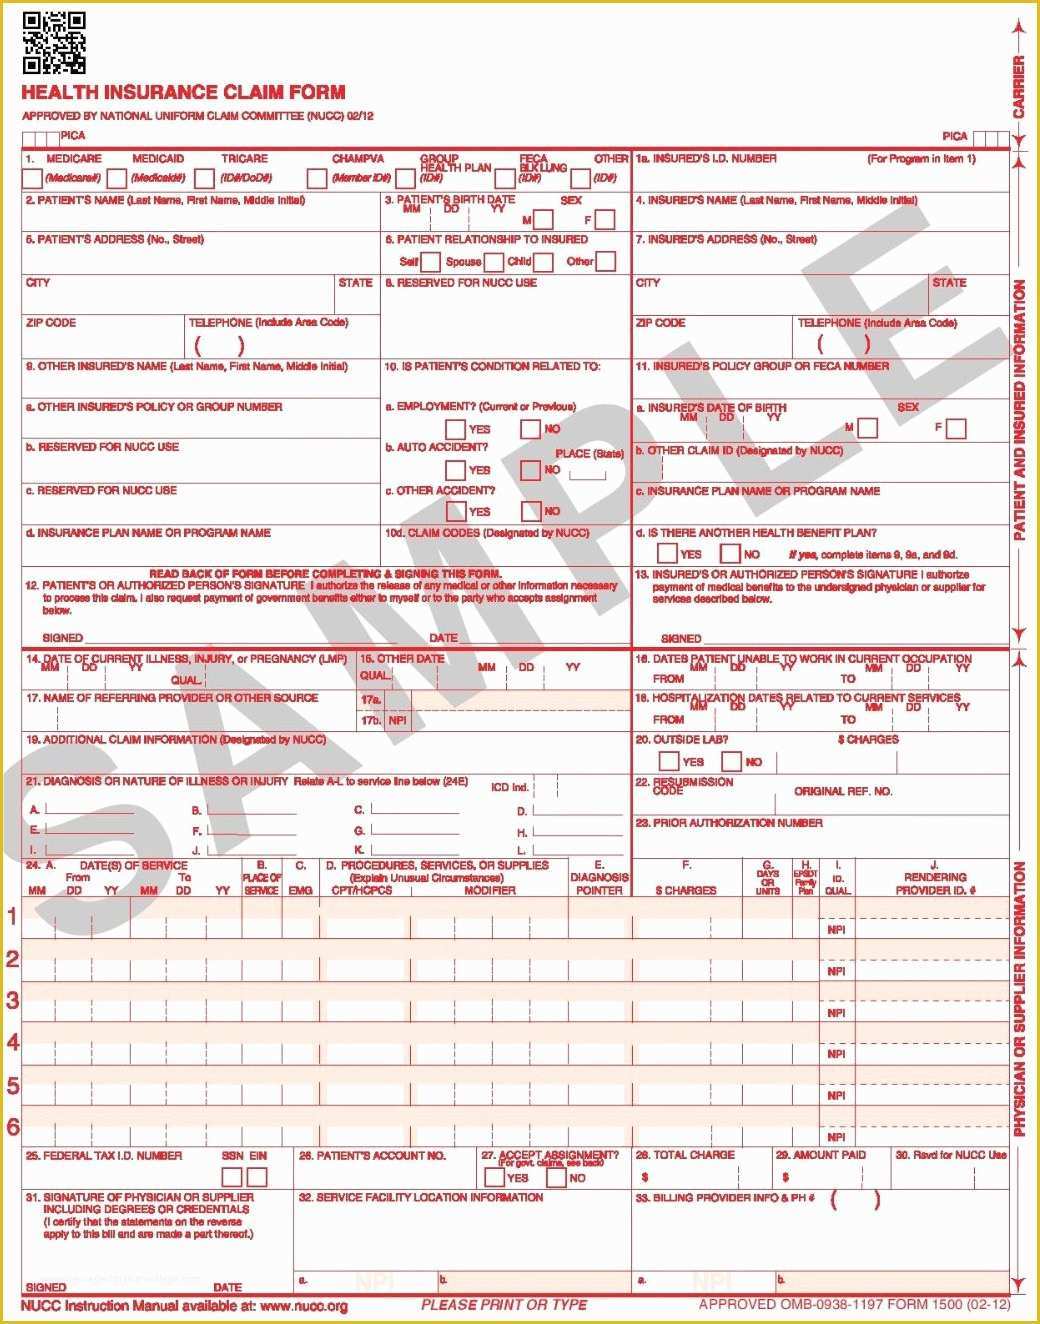 Free Health Insurance Claim form 1500 Template Of Medical Claim form 1500 to Pin On Pinterest